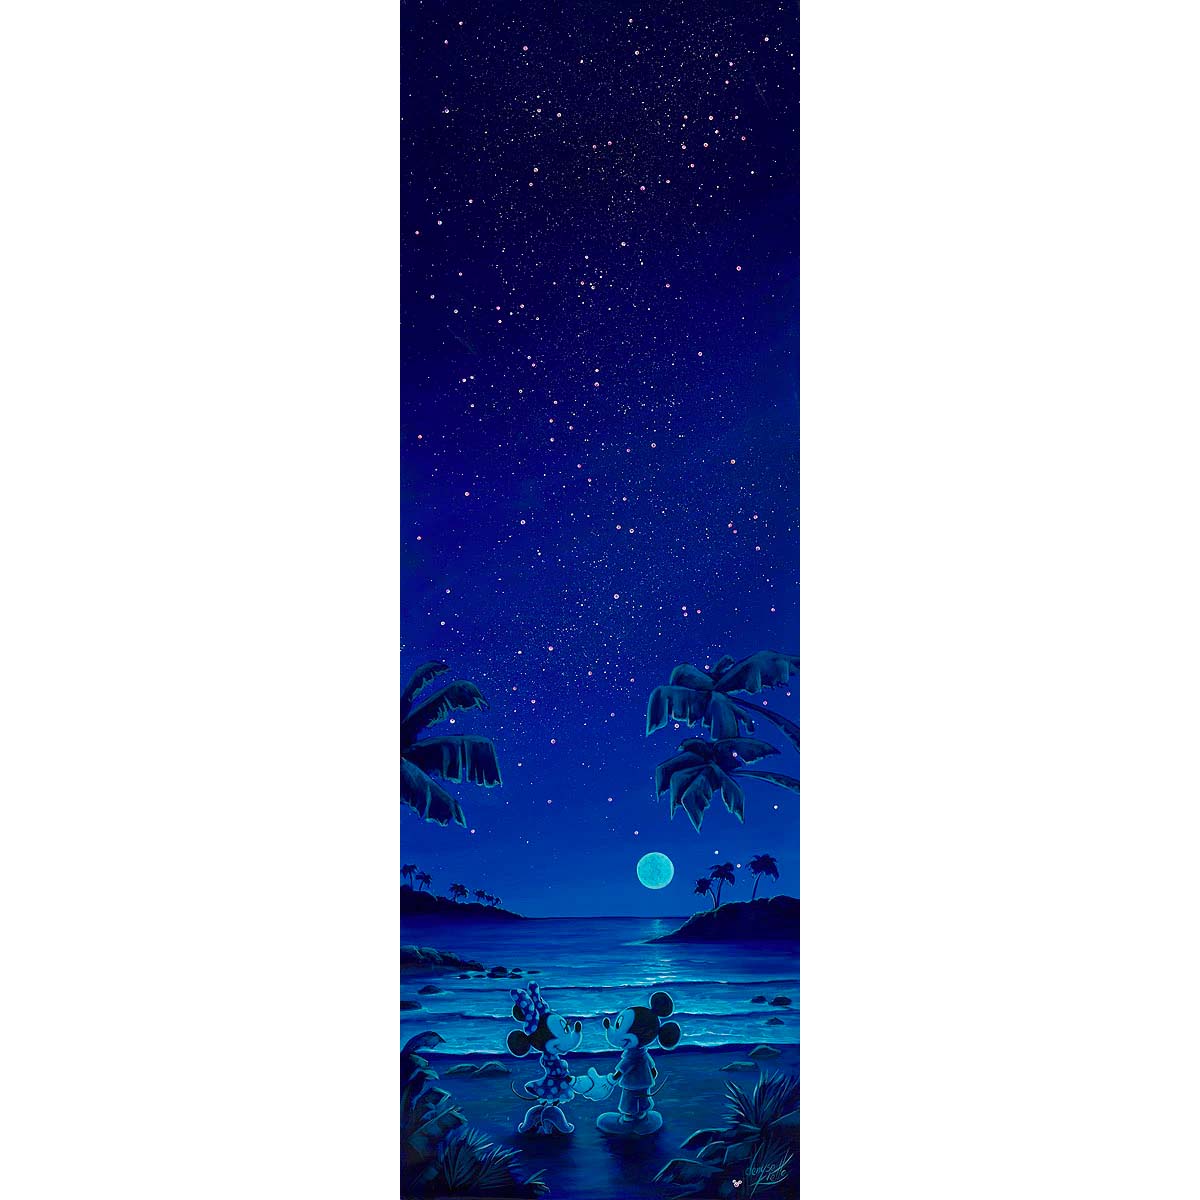 Denyse Klette Disney "Under the Stars" Limited Edition Canvas Giclee